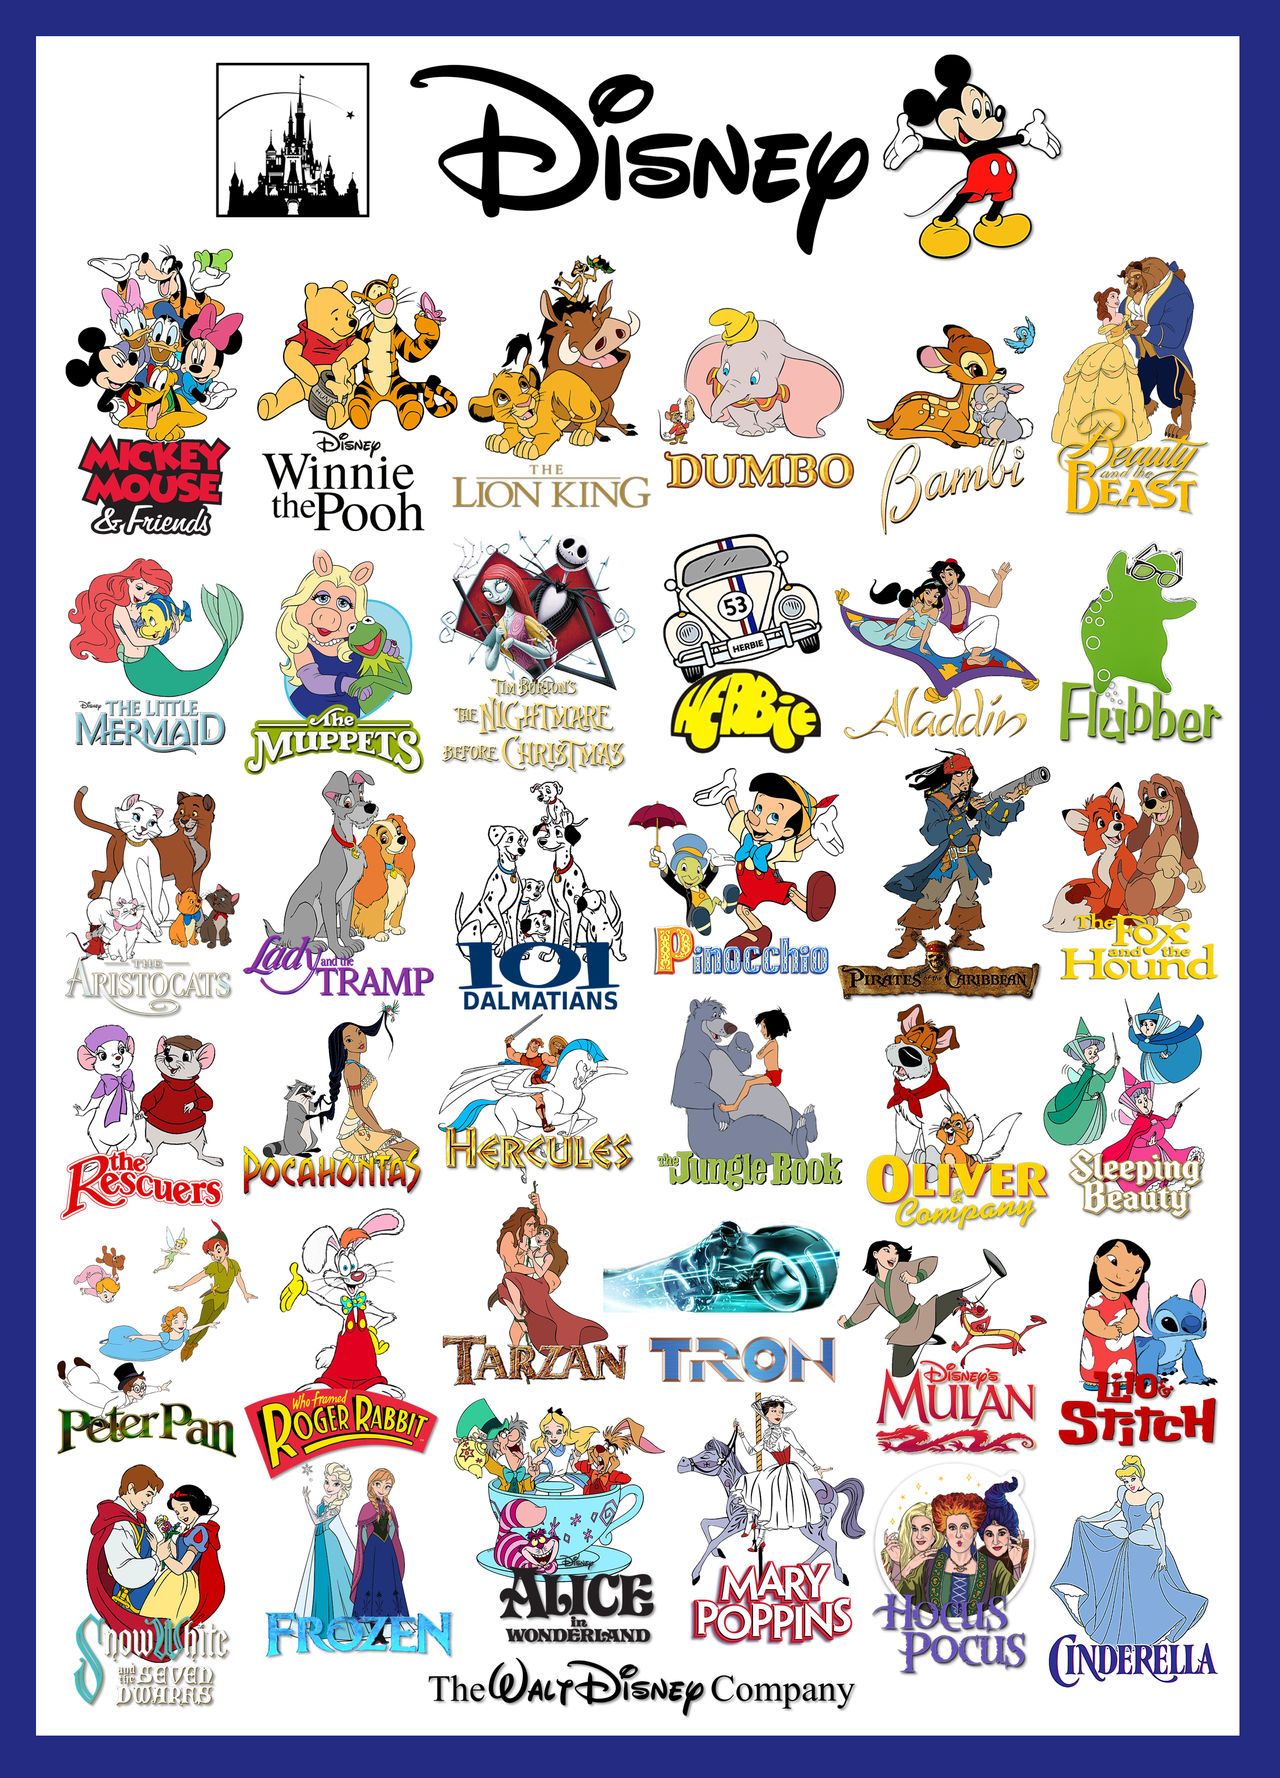 Disney characters, franchises and series by gikesmanners1995 on DeviantArt